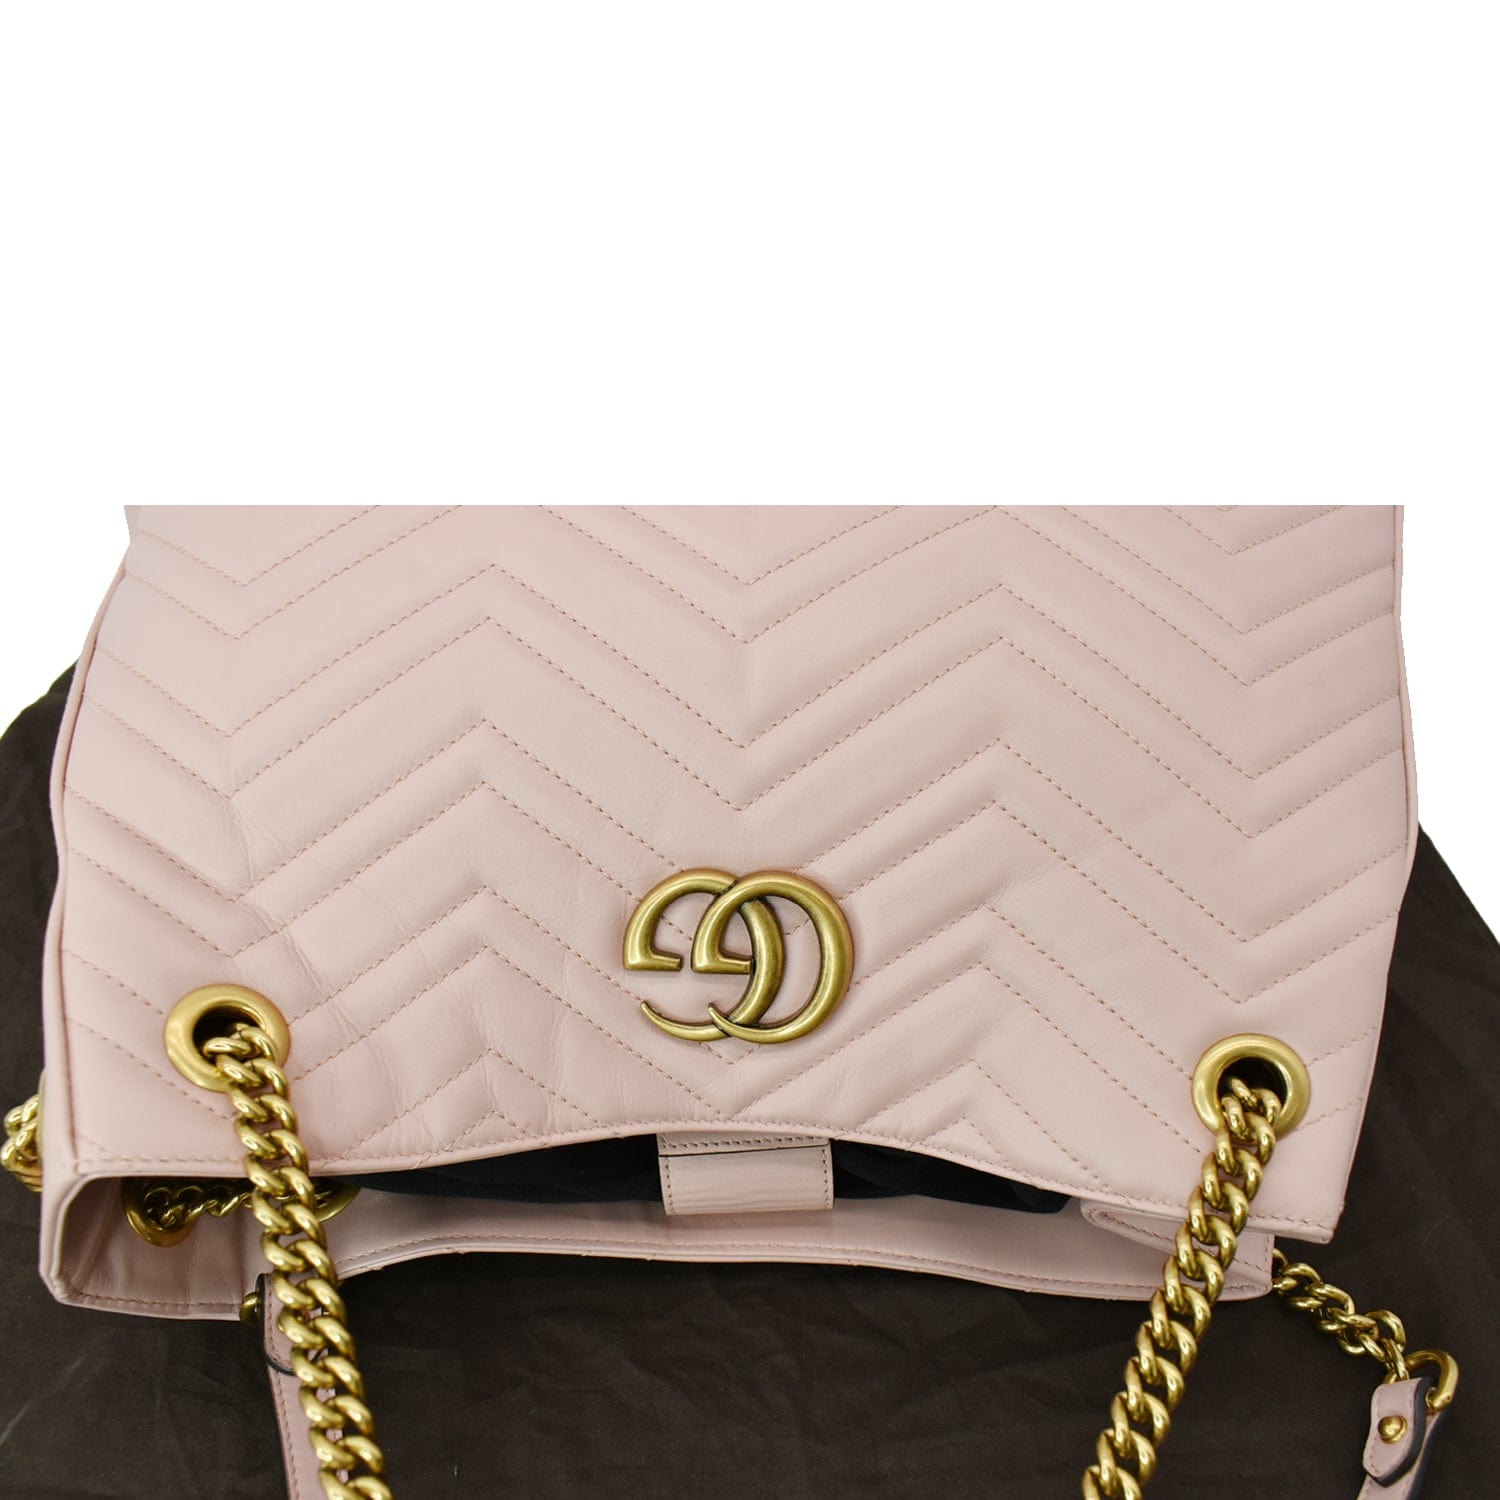 GG Marmont small quilted leather shoulder bag